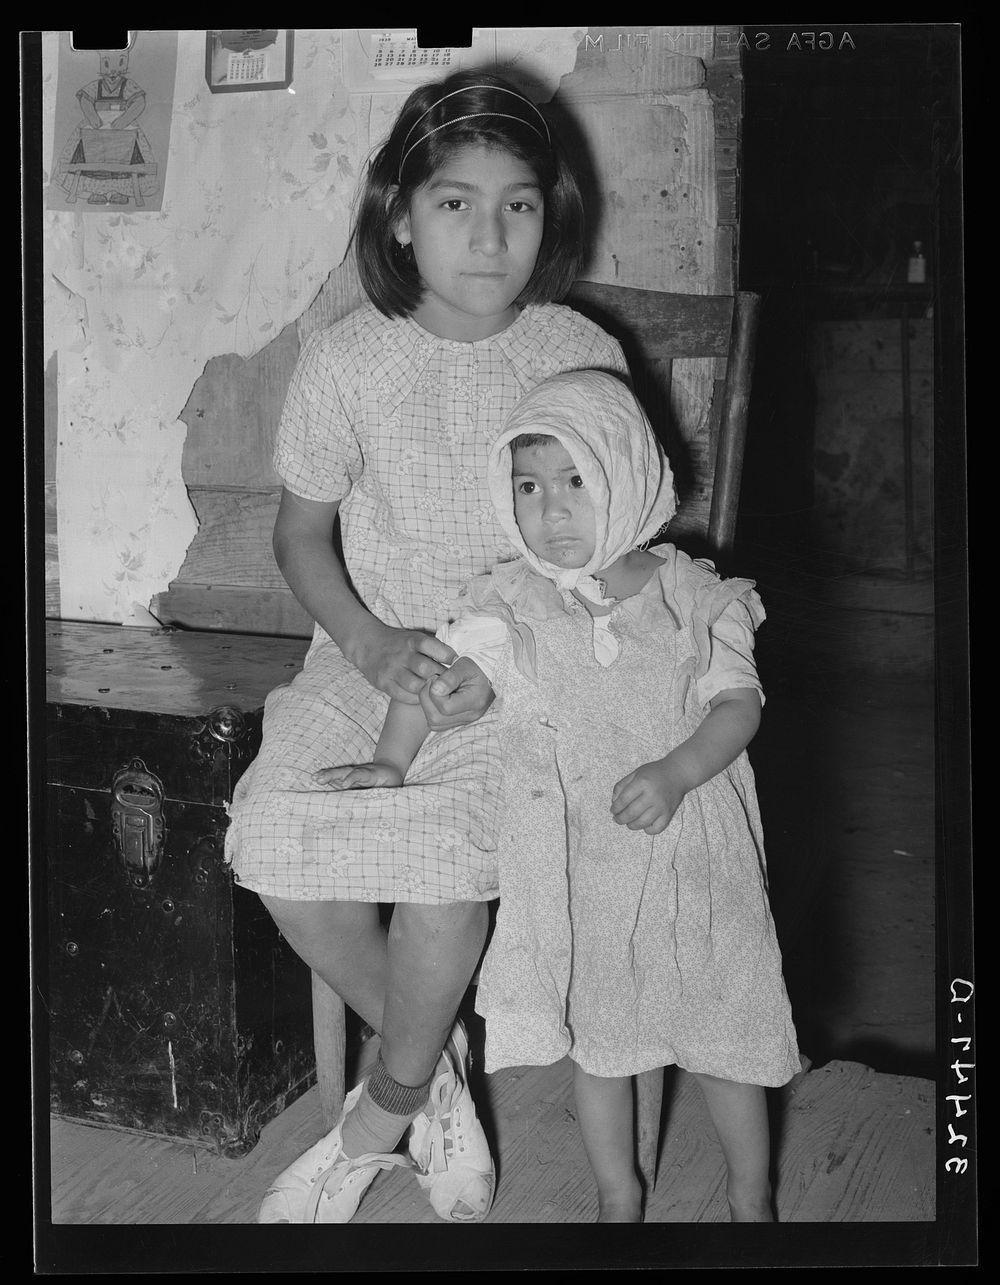 Mexican children. San Antonio, Texas by Russell Lee